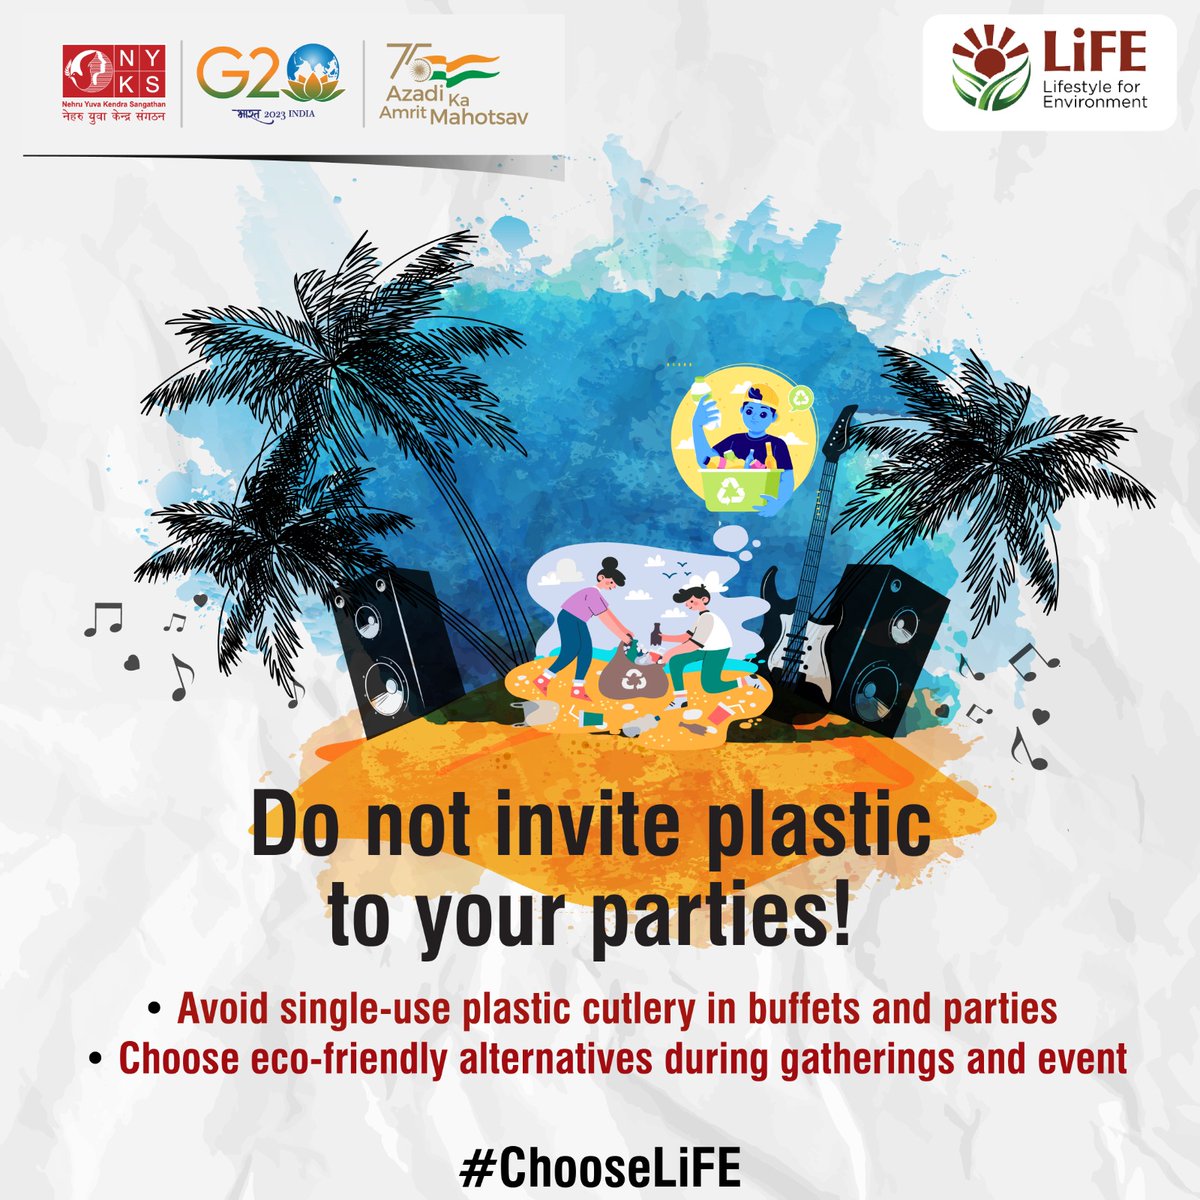 Let's make a difference together! 
Say NO to single-use plastics and YES to eco-friendly options during your next gathering or event. Make a positive impact with #MissionLiFE.

#ChooseLiFE #SayNoToSingleUsePlastic #SaveEarth